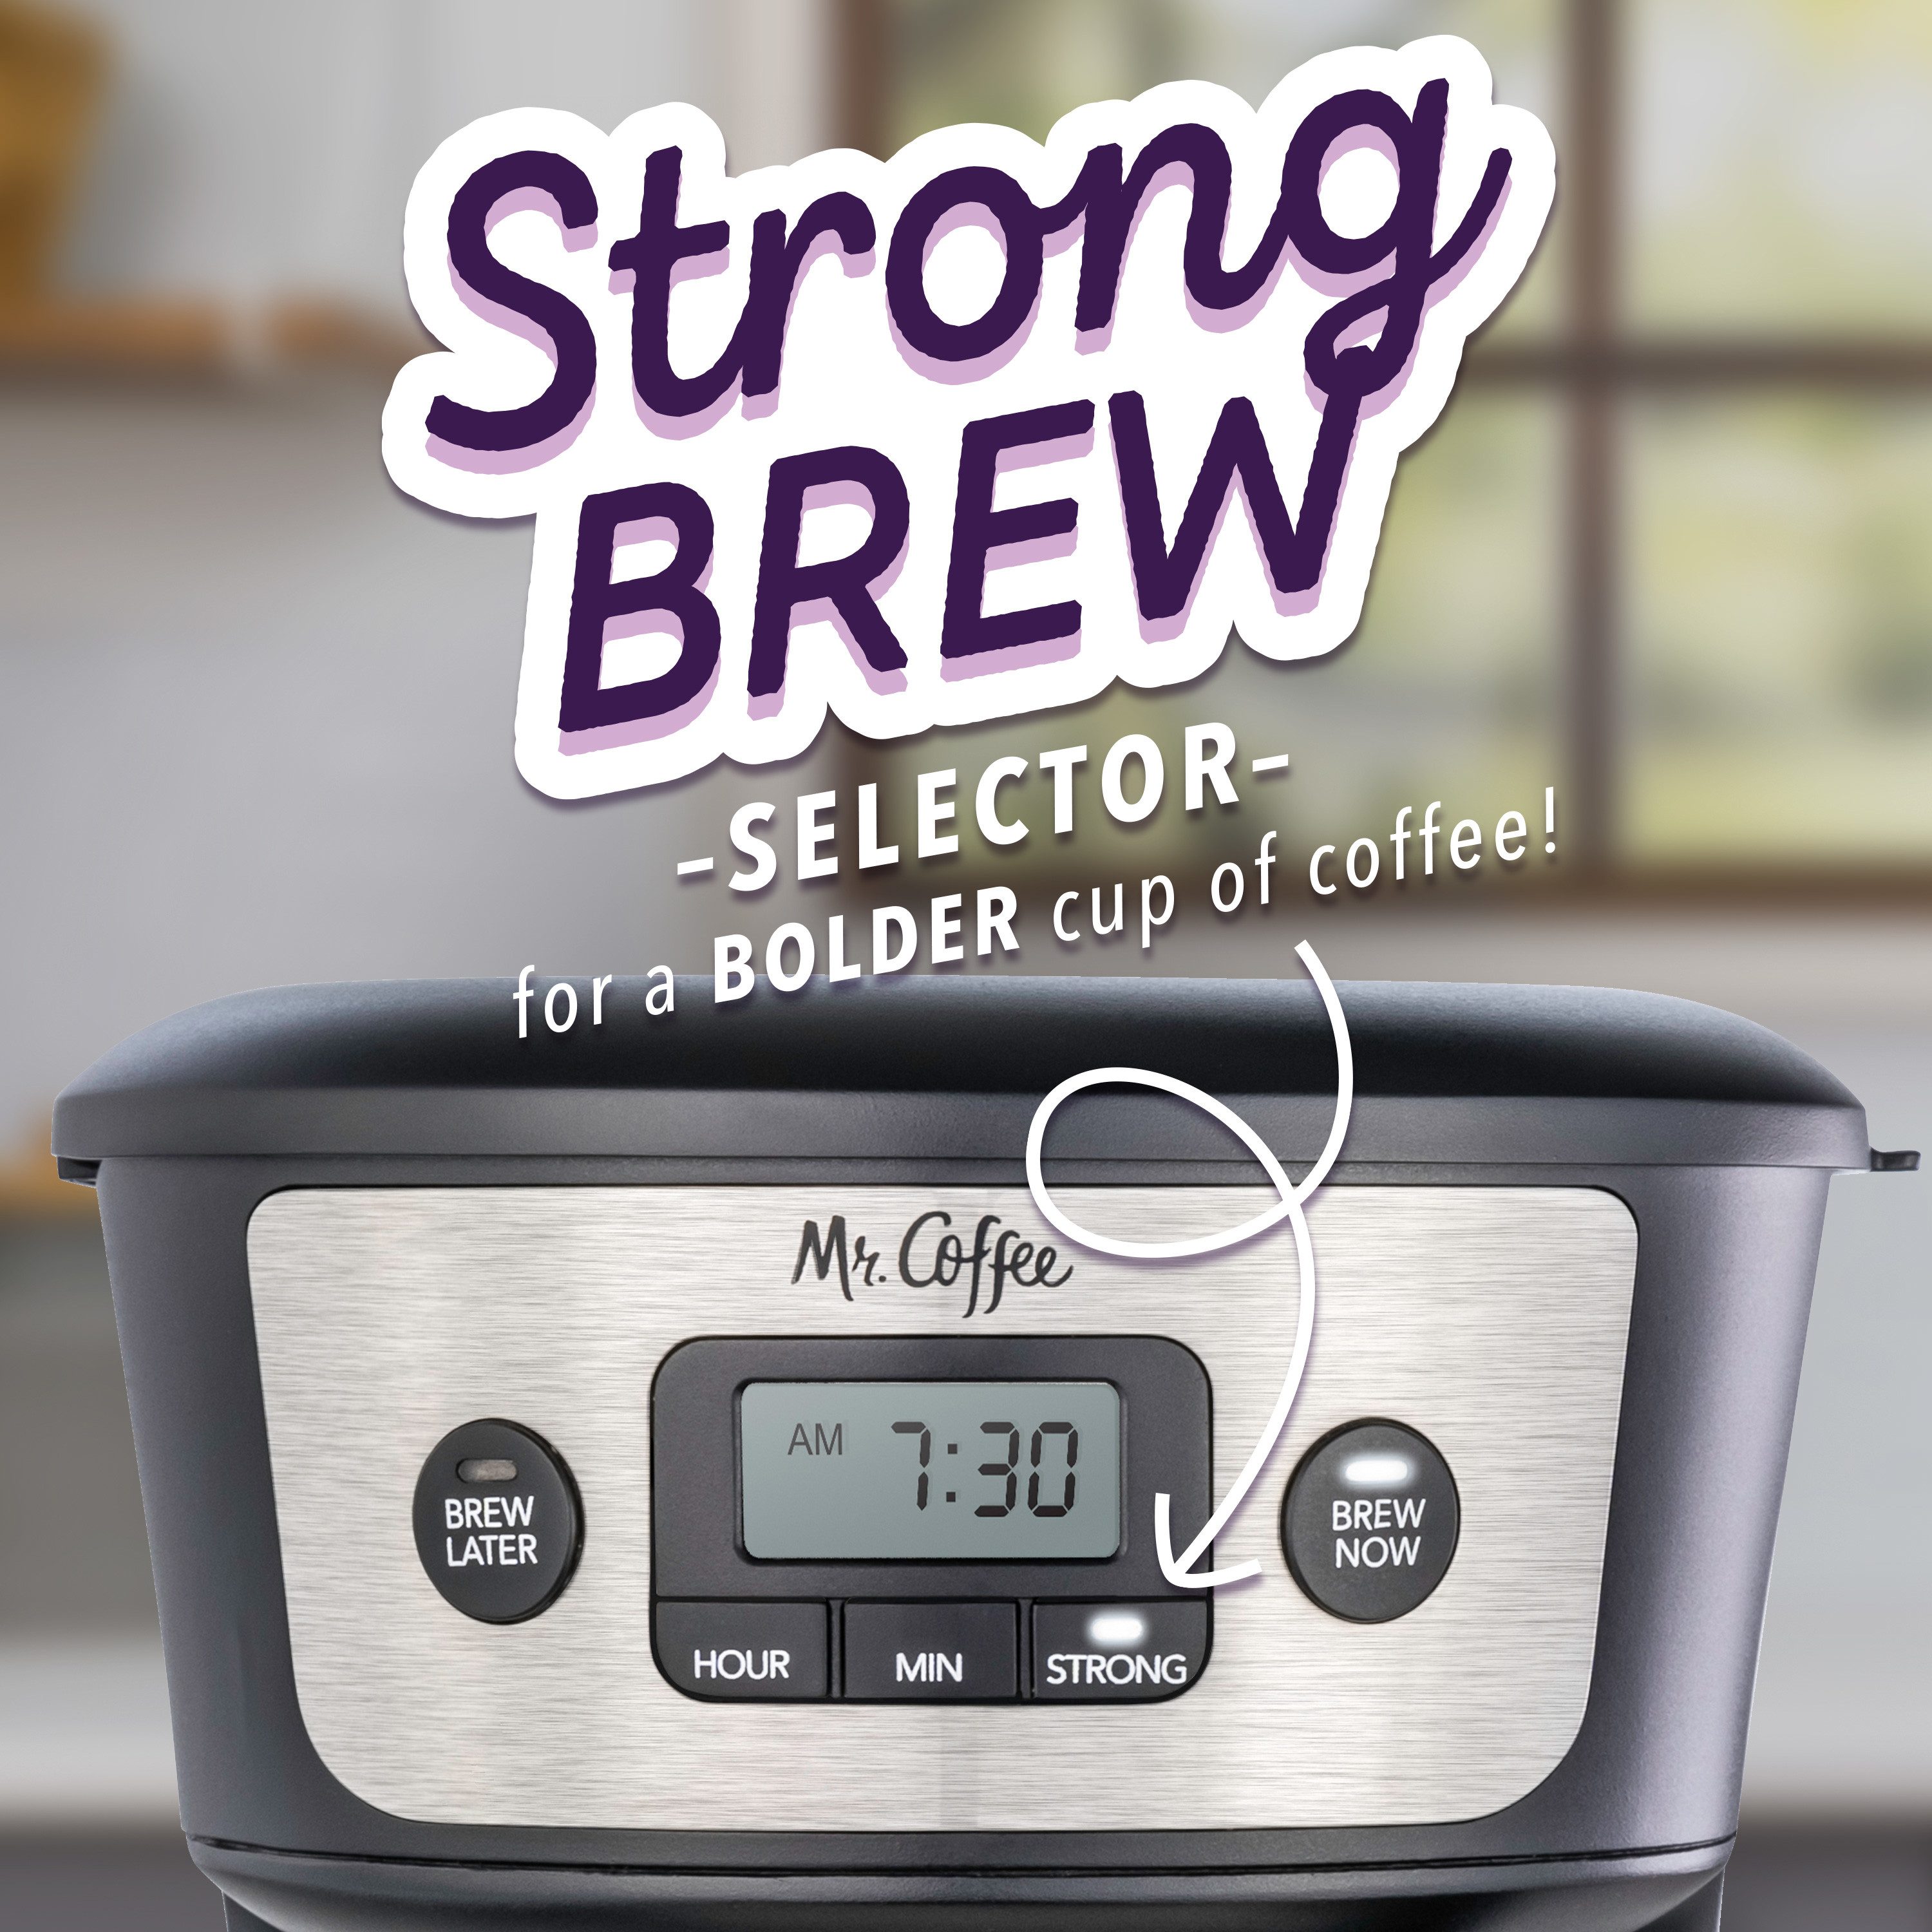 Mr. Coffee® 12-Cup Programmable Coffee Maker with Strong Brew Selector, Stainless Steel - image 5 of 10